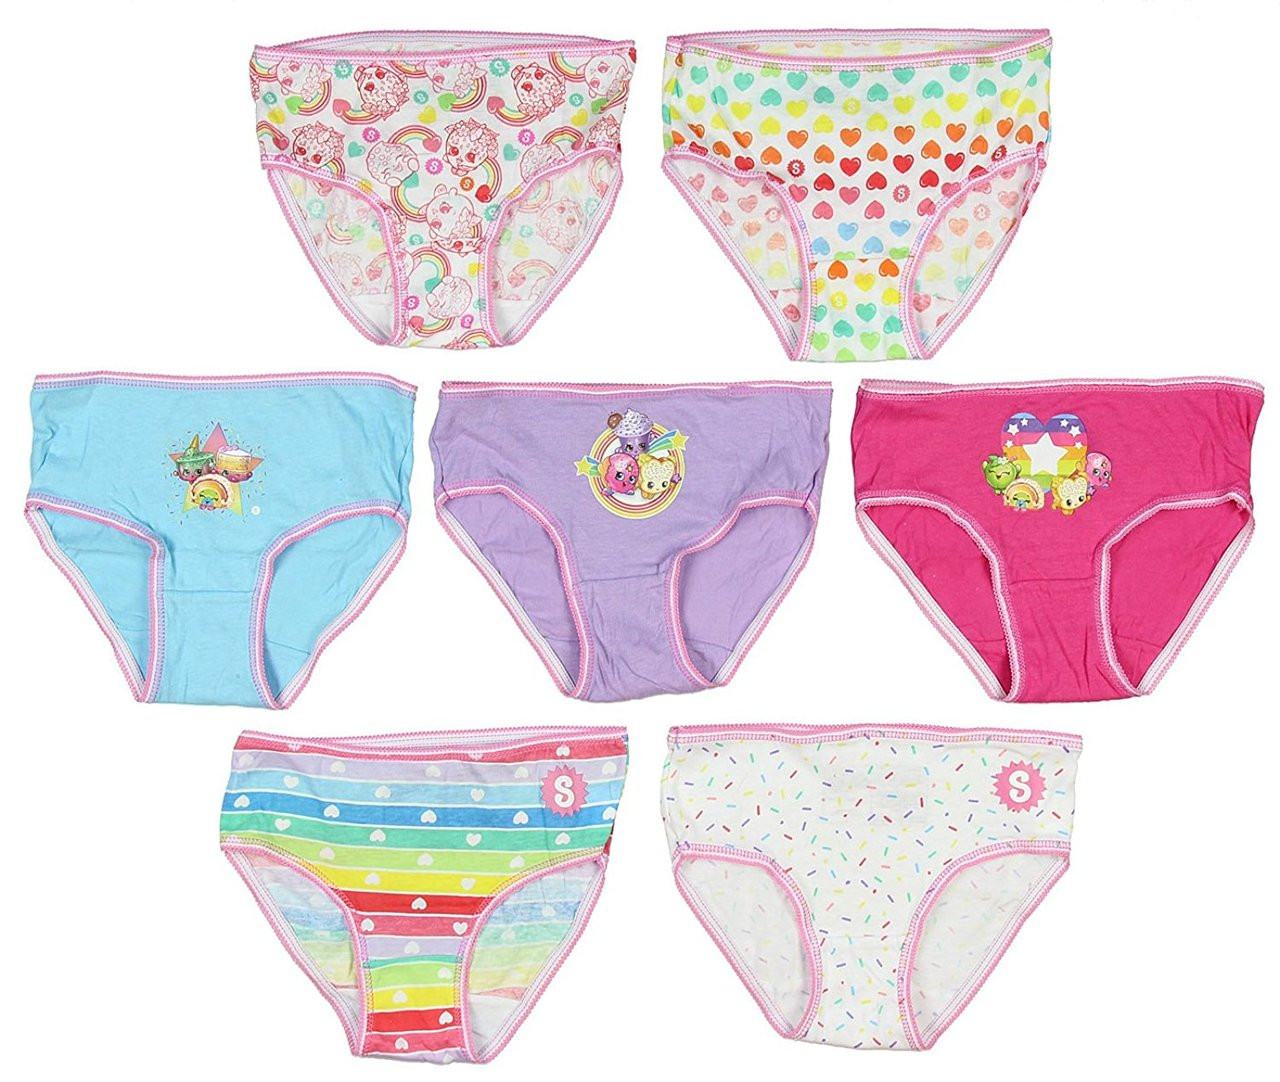 Buy Handcraft Little Girls' My Little Pony Panty (Pack of 7), Multi, 6 at